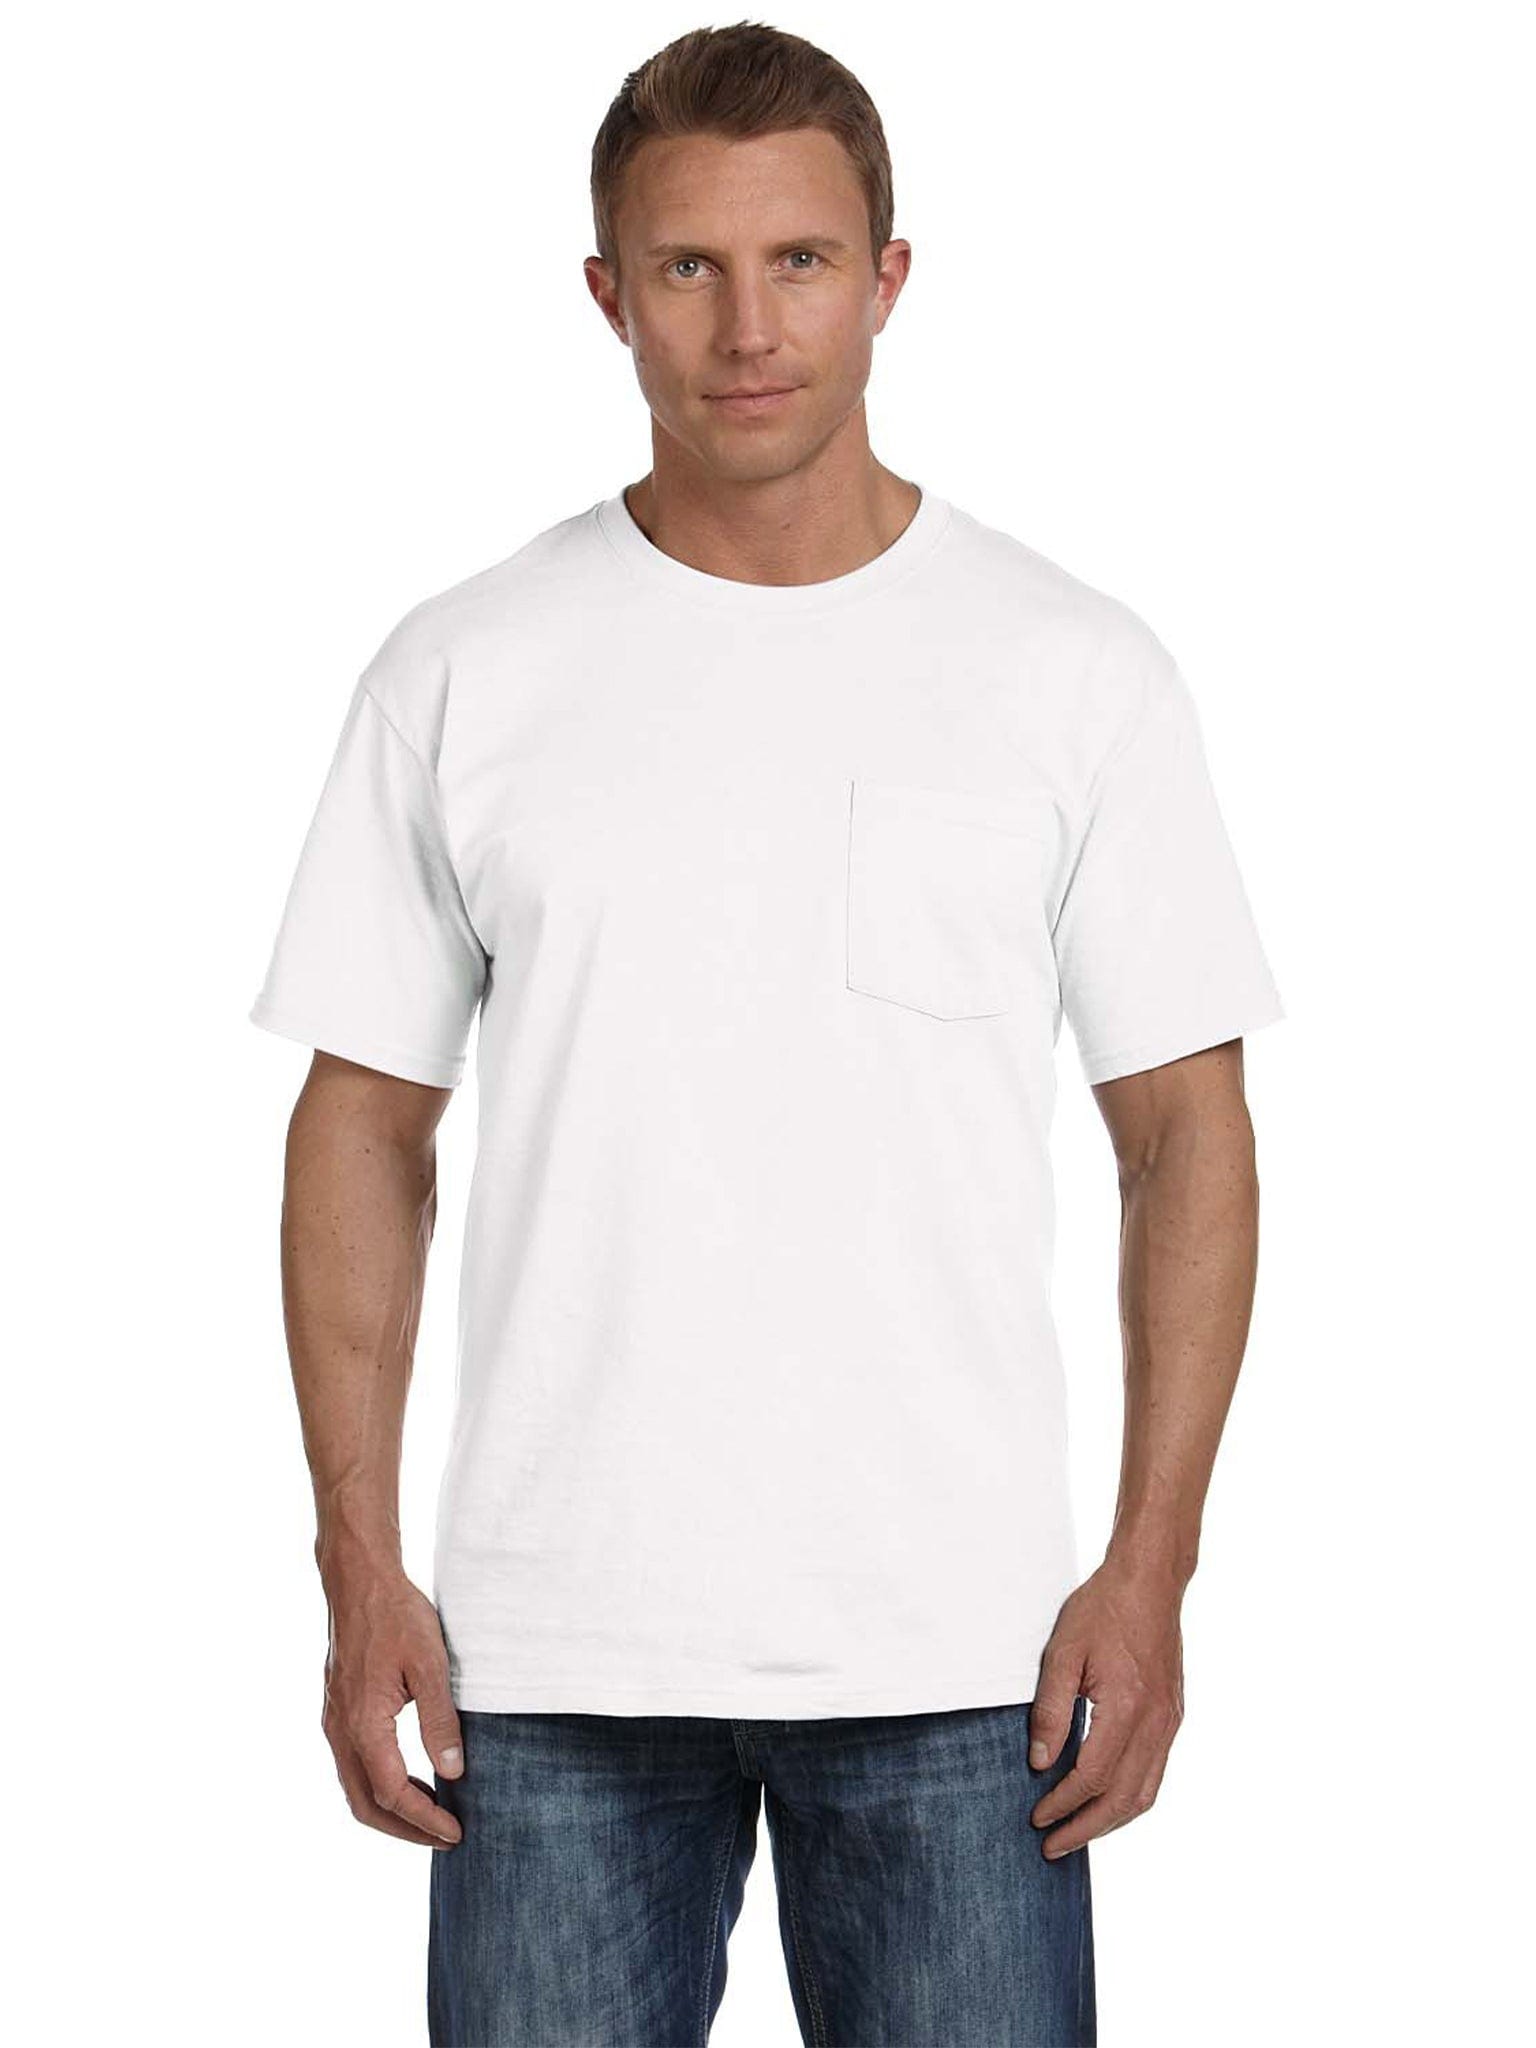 Fruit of the Loom Cotton Pocket T-Shirt